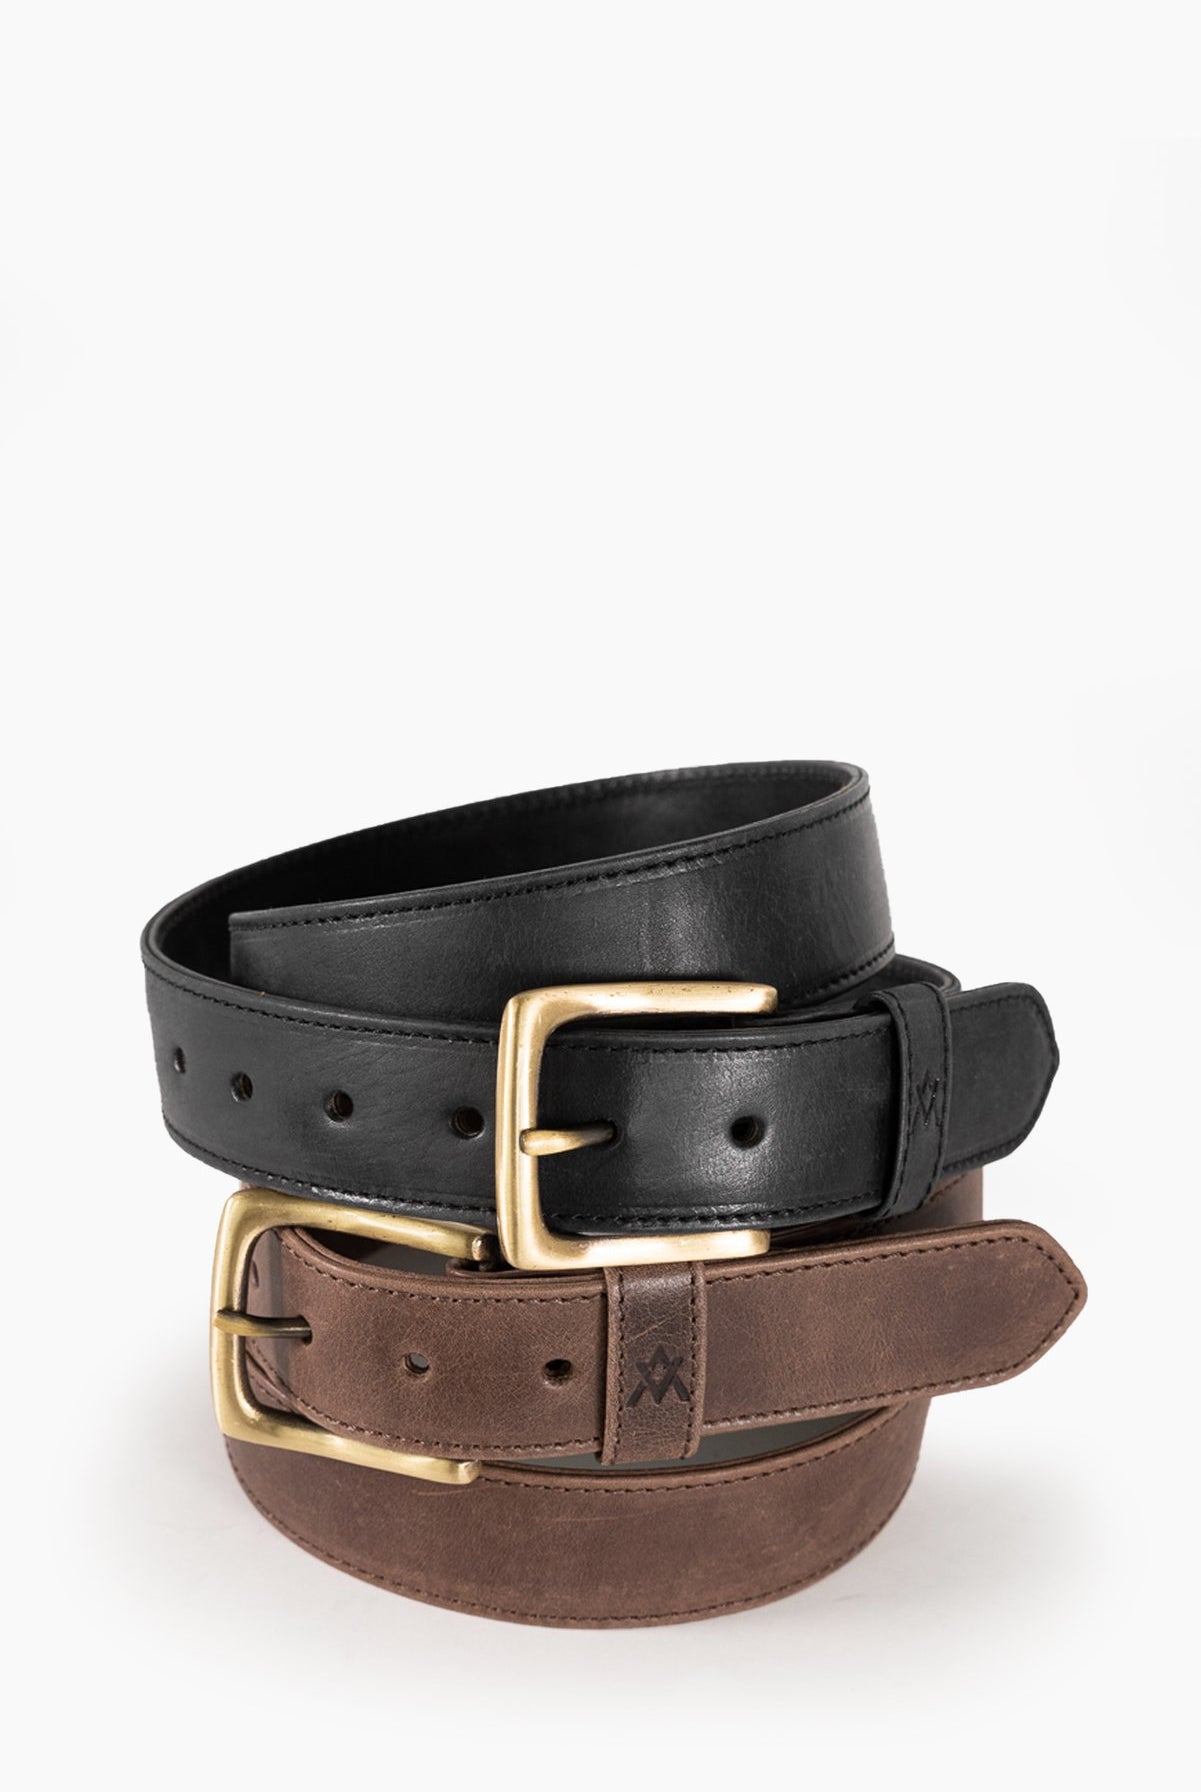 Elevate men's black and brown leather belt raleigh ethical boutique